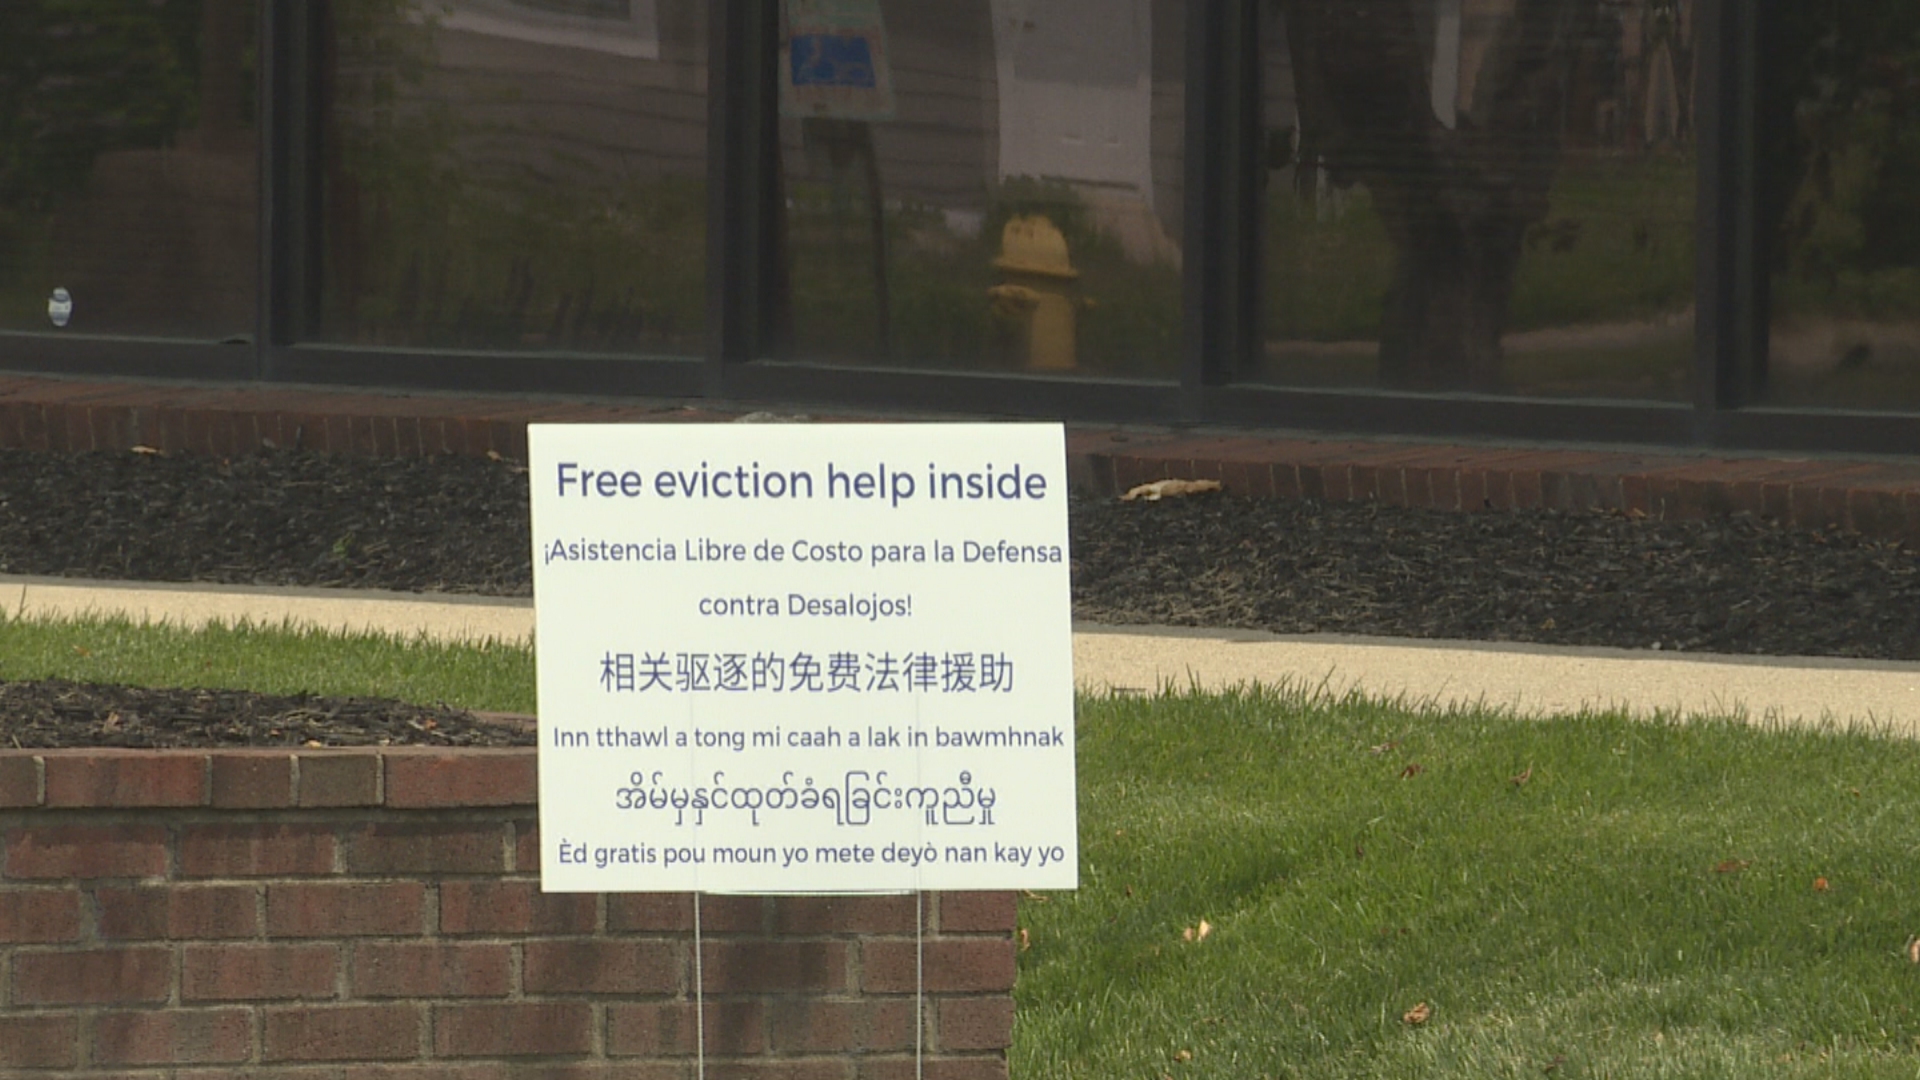 Eviction prevention groups get new lifeline